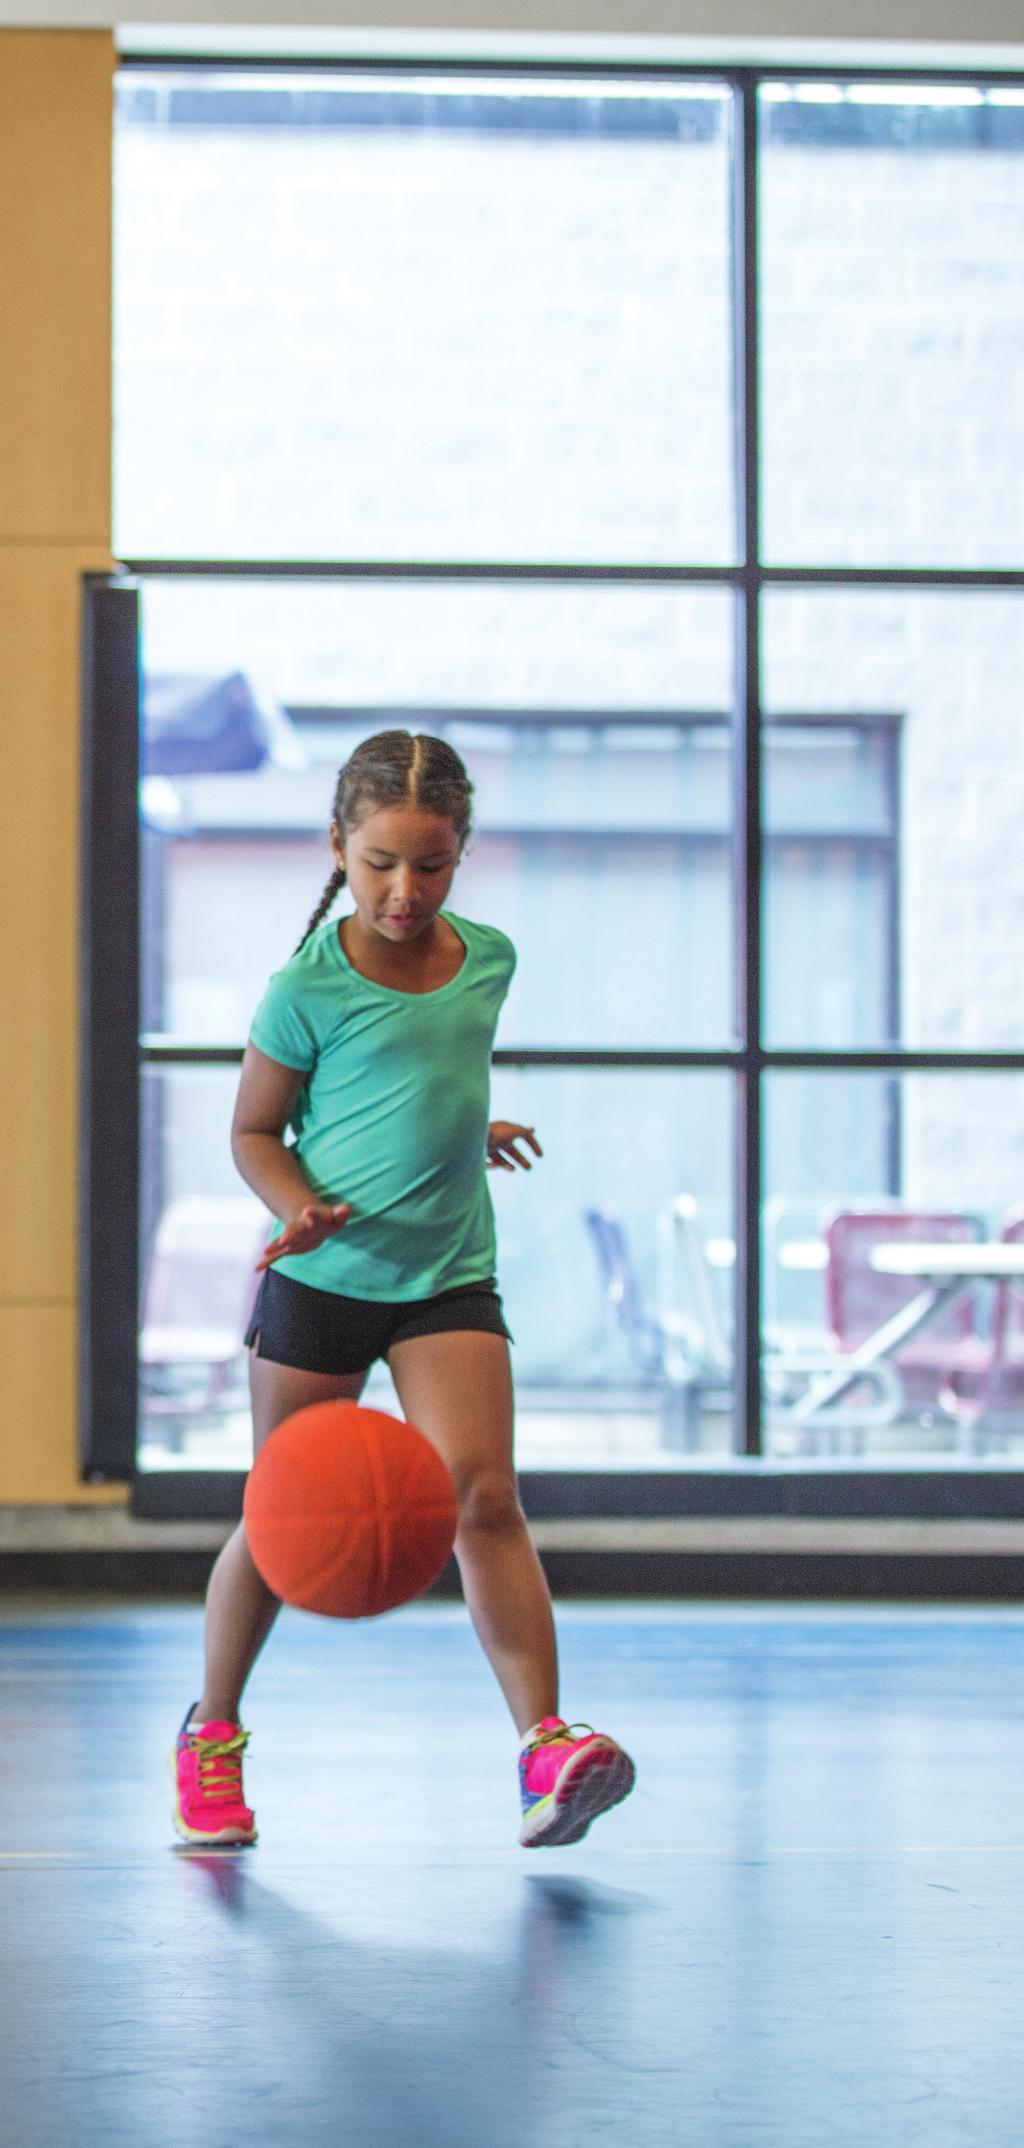 America Society of Health and Physical Educators, 2014). Along with physical education, supplemental physical activity (PA) opportunities are commonly used in schools to increase activity time (e.g., recess, classroom PA breaks).